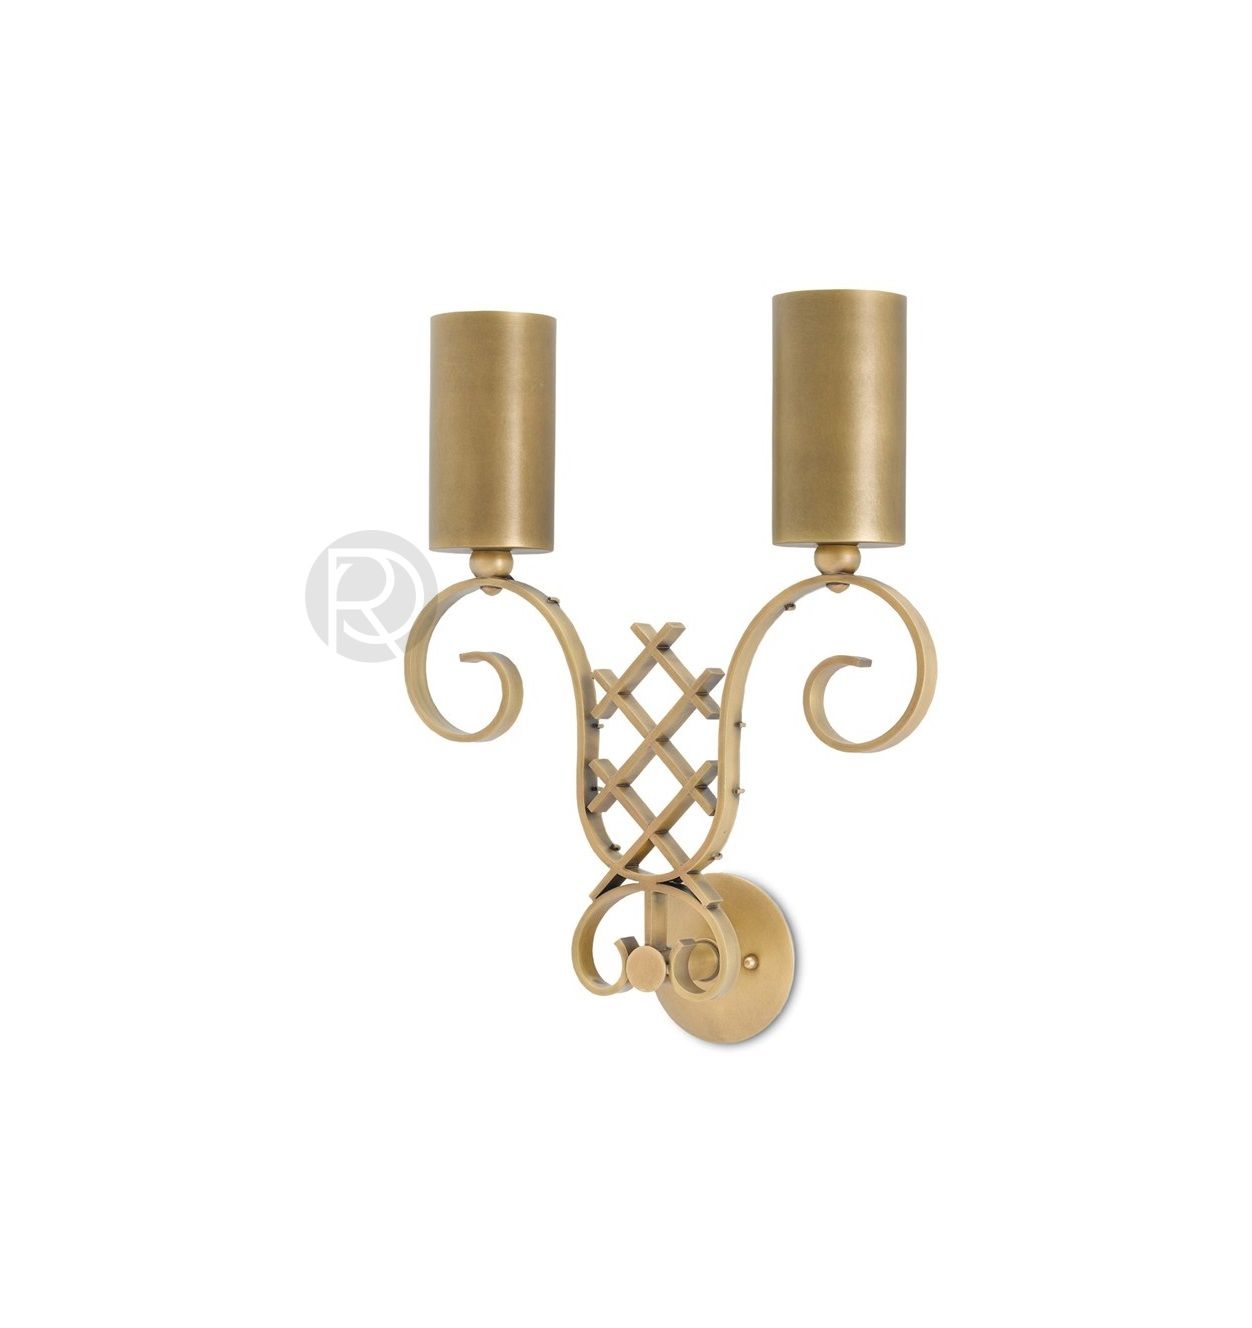 Wall lamp (Sconce) WAGNER by Currey & Company